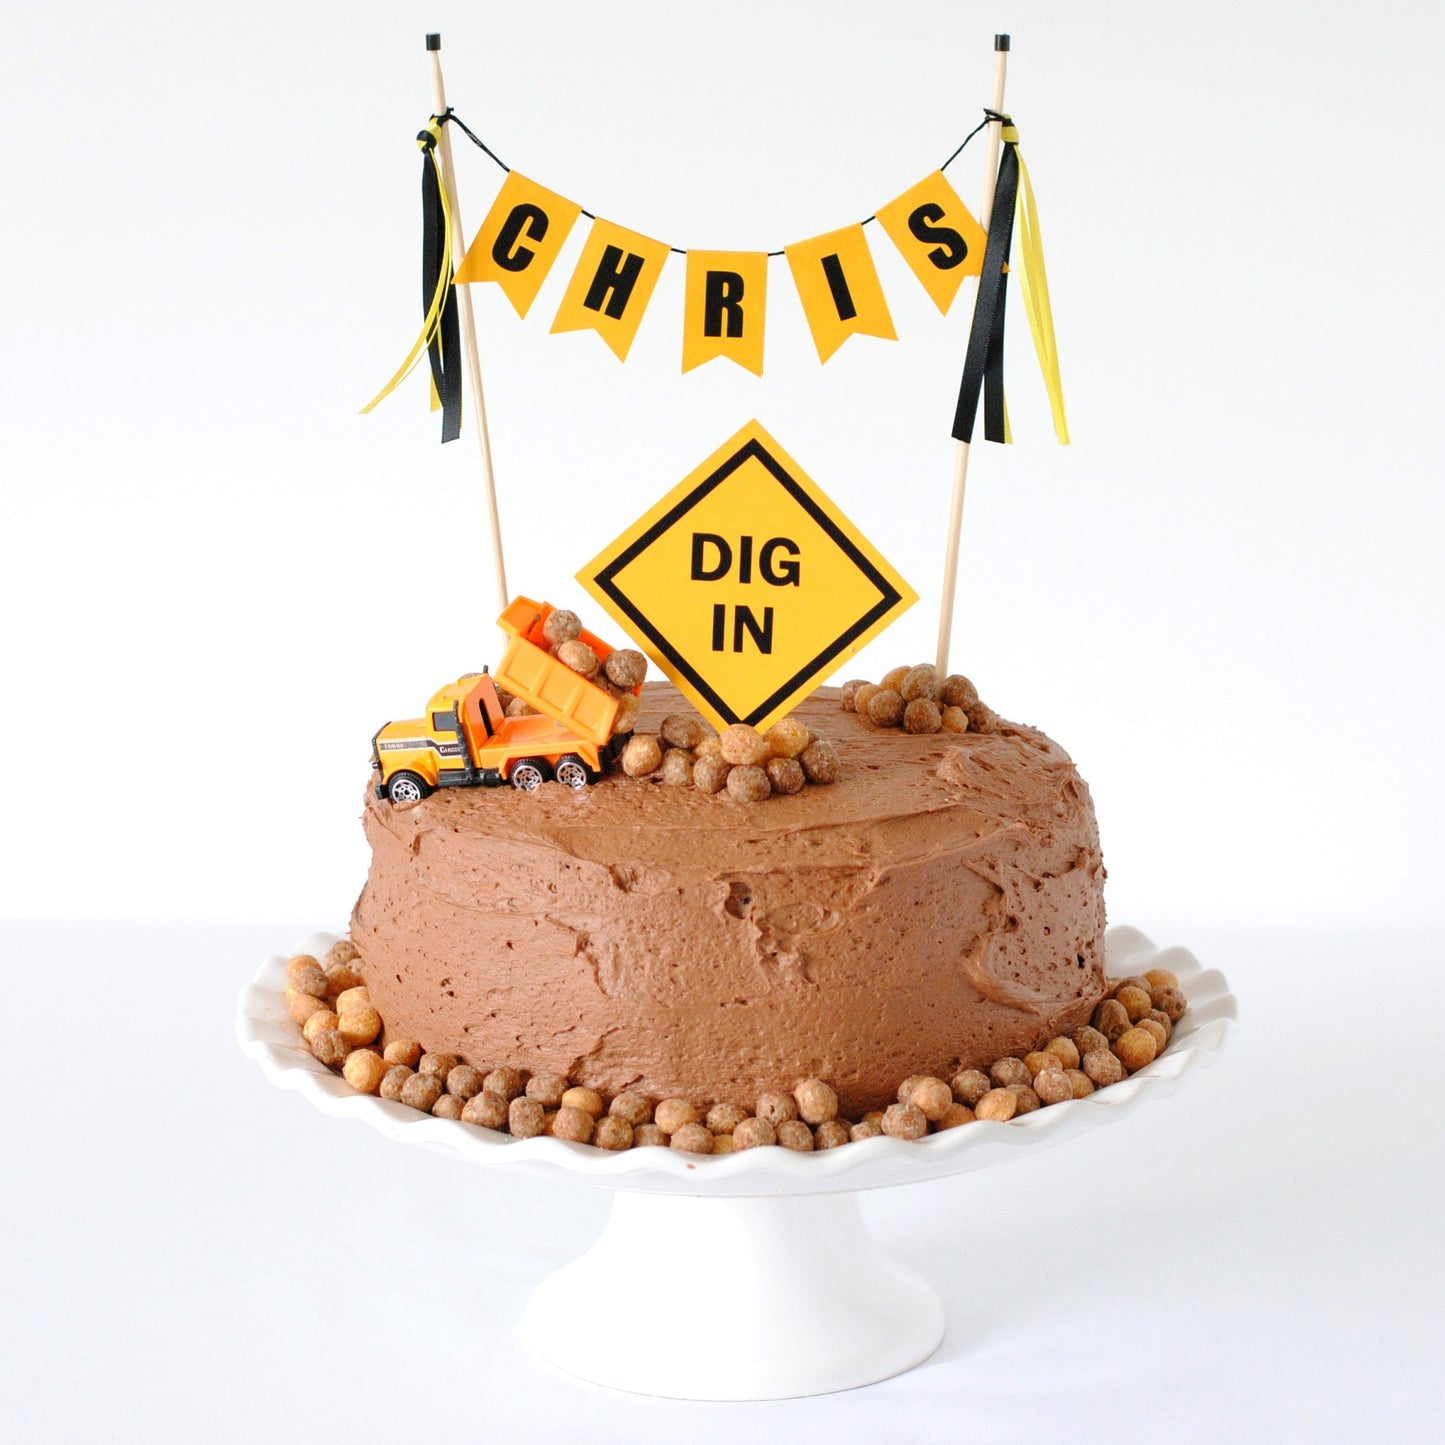 
                  
                    chocolate cake  with toy dump truck for construction theme party with yellow and black construction sign cake topper
                  
                